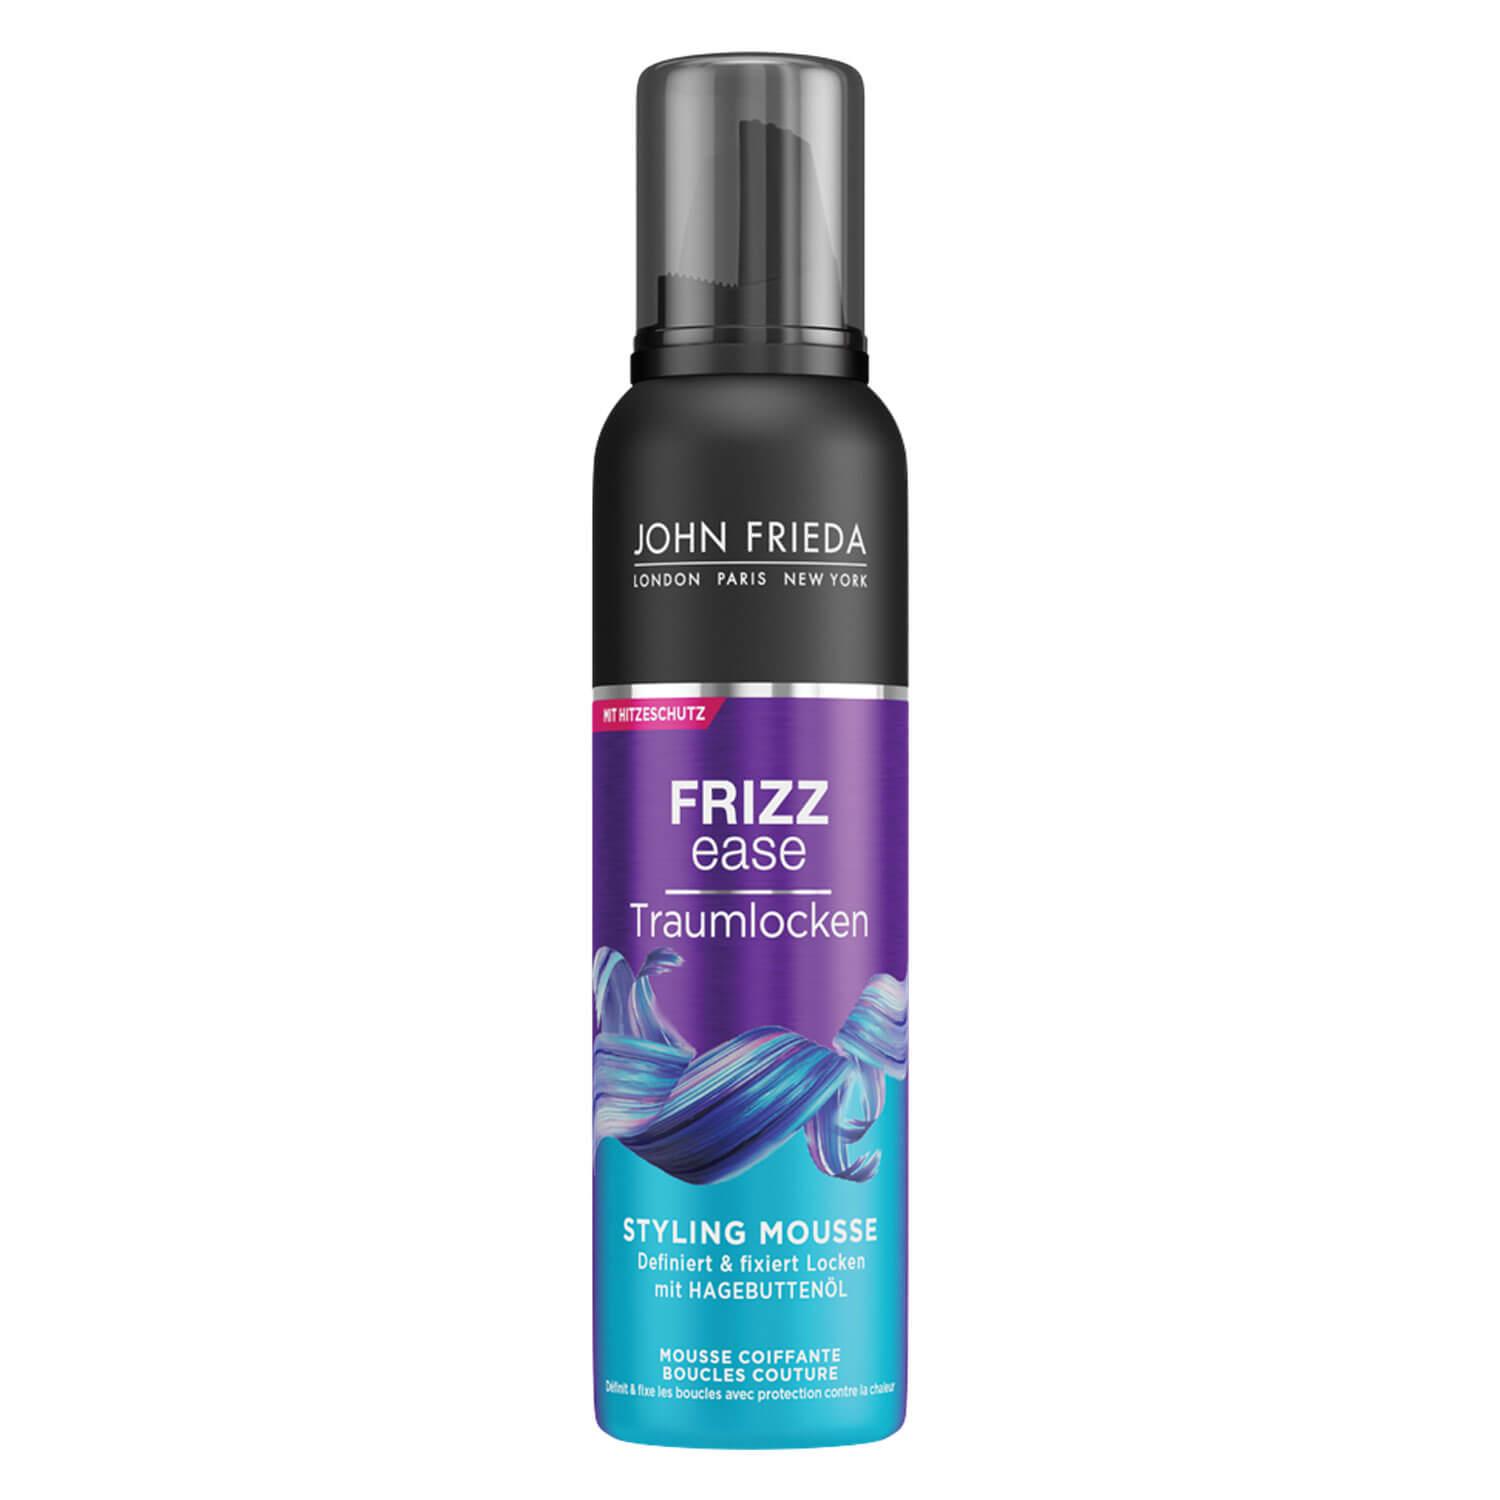 Frizz Ease - Mousse Boucles Couture